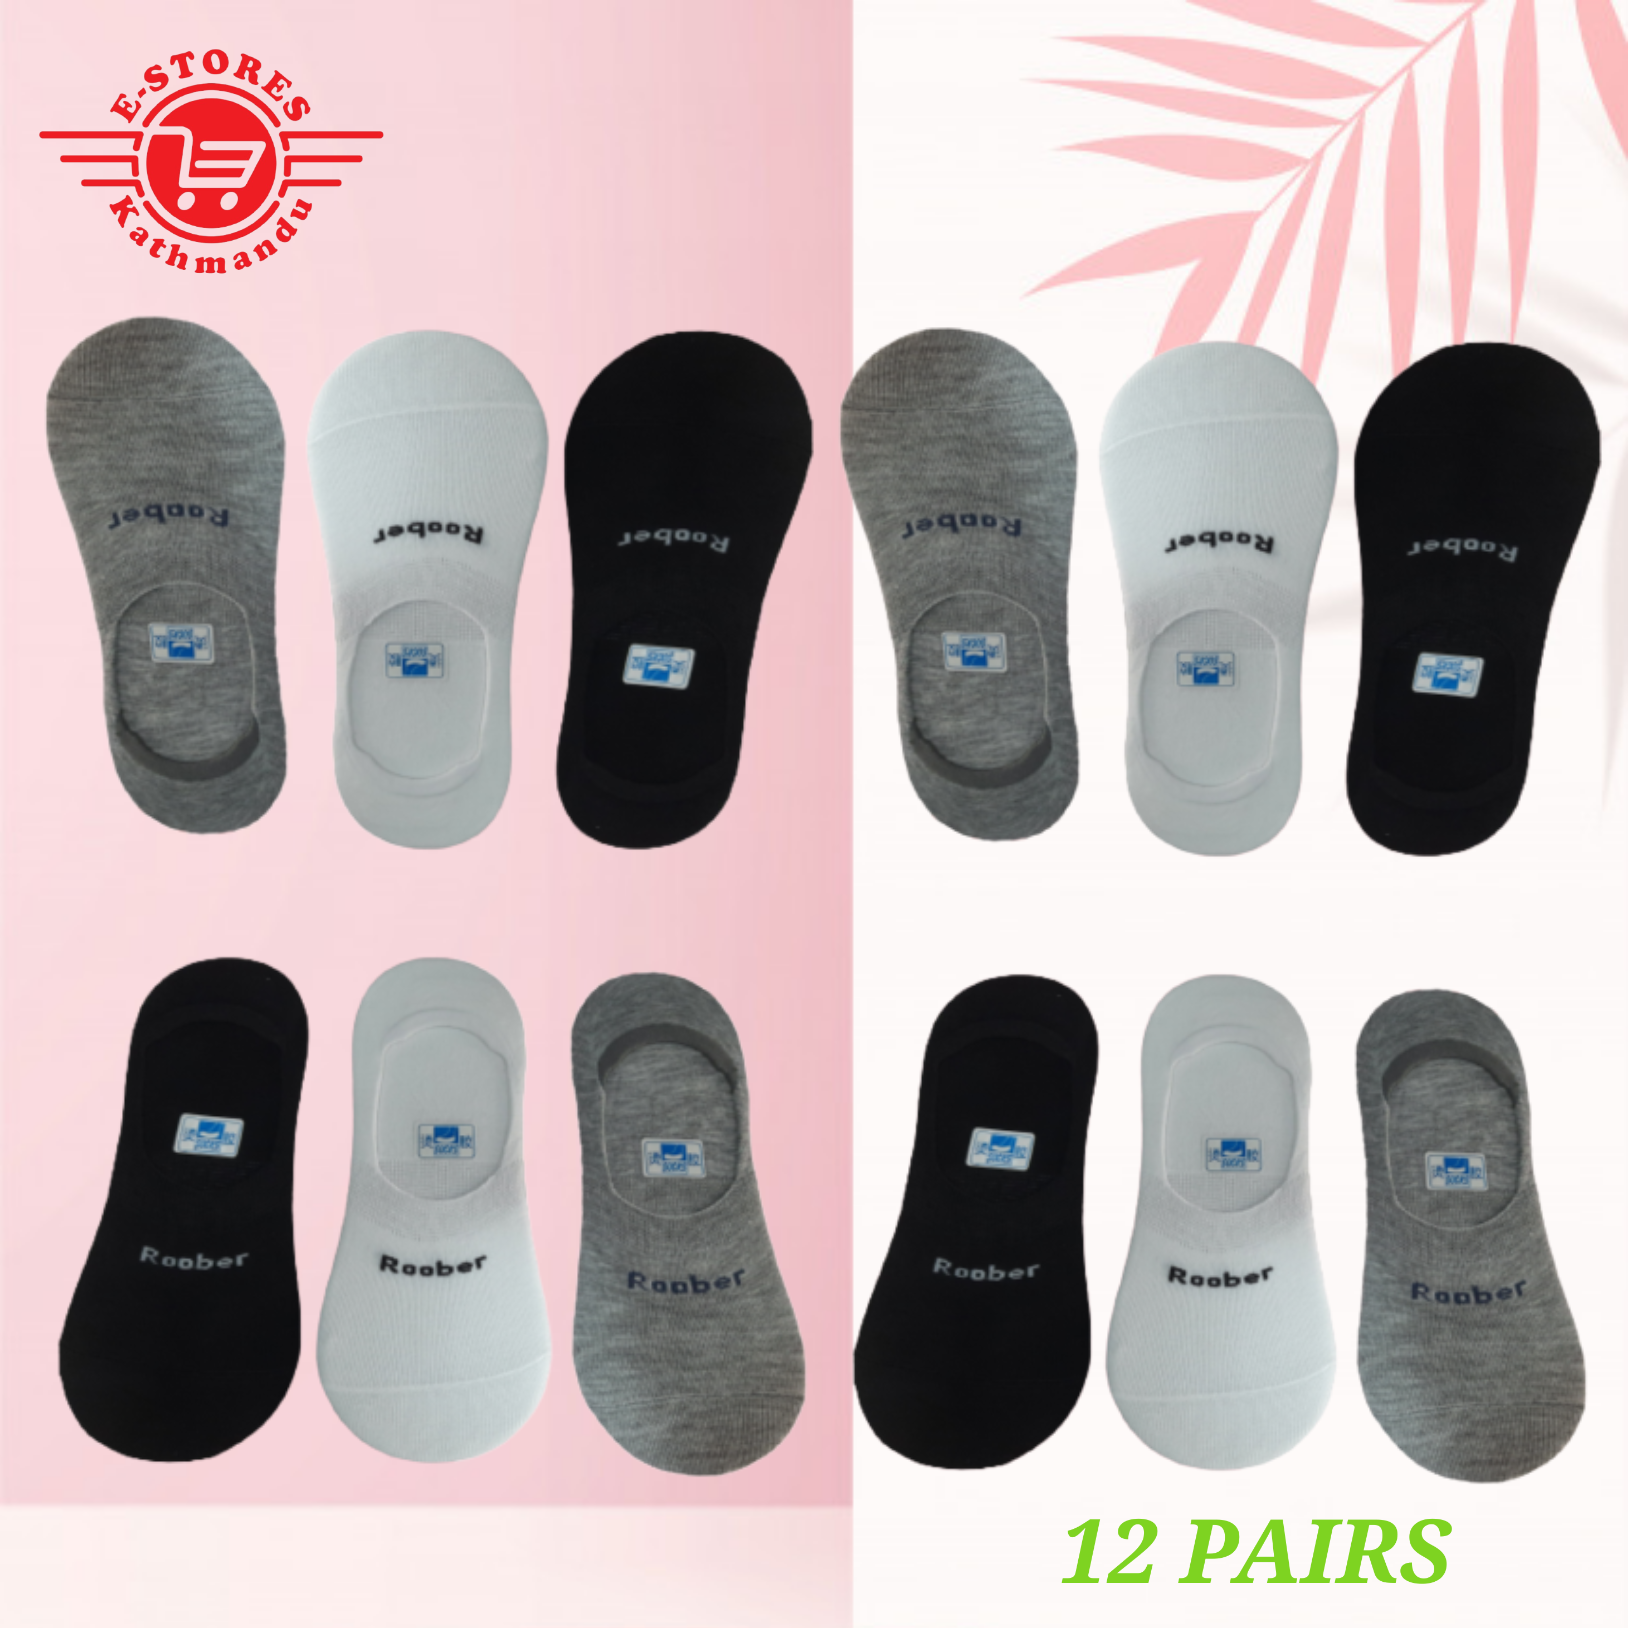 Buy Pack Of 3 Pairs Roober Footcover Cotton Loafer Socks For Men